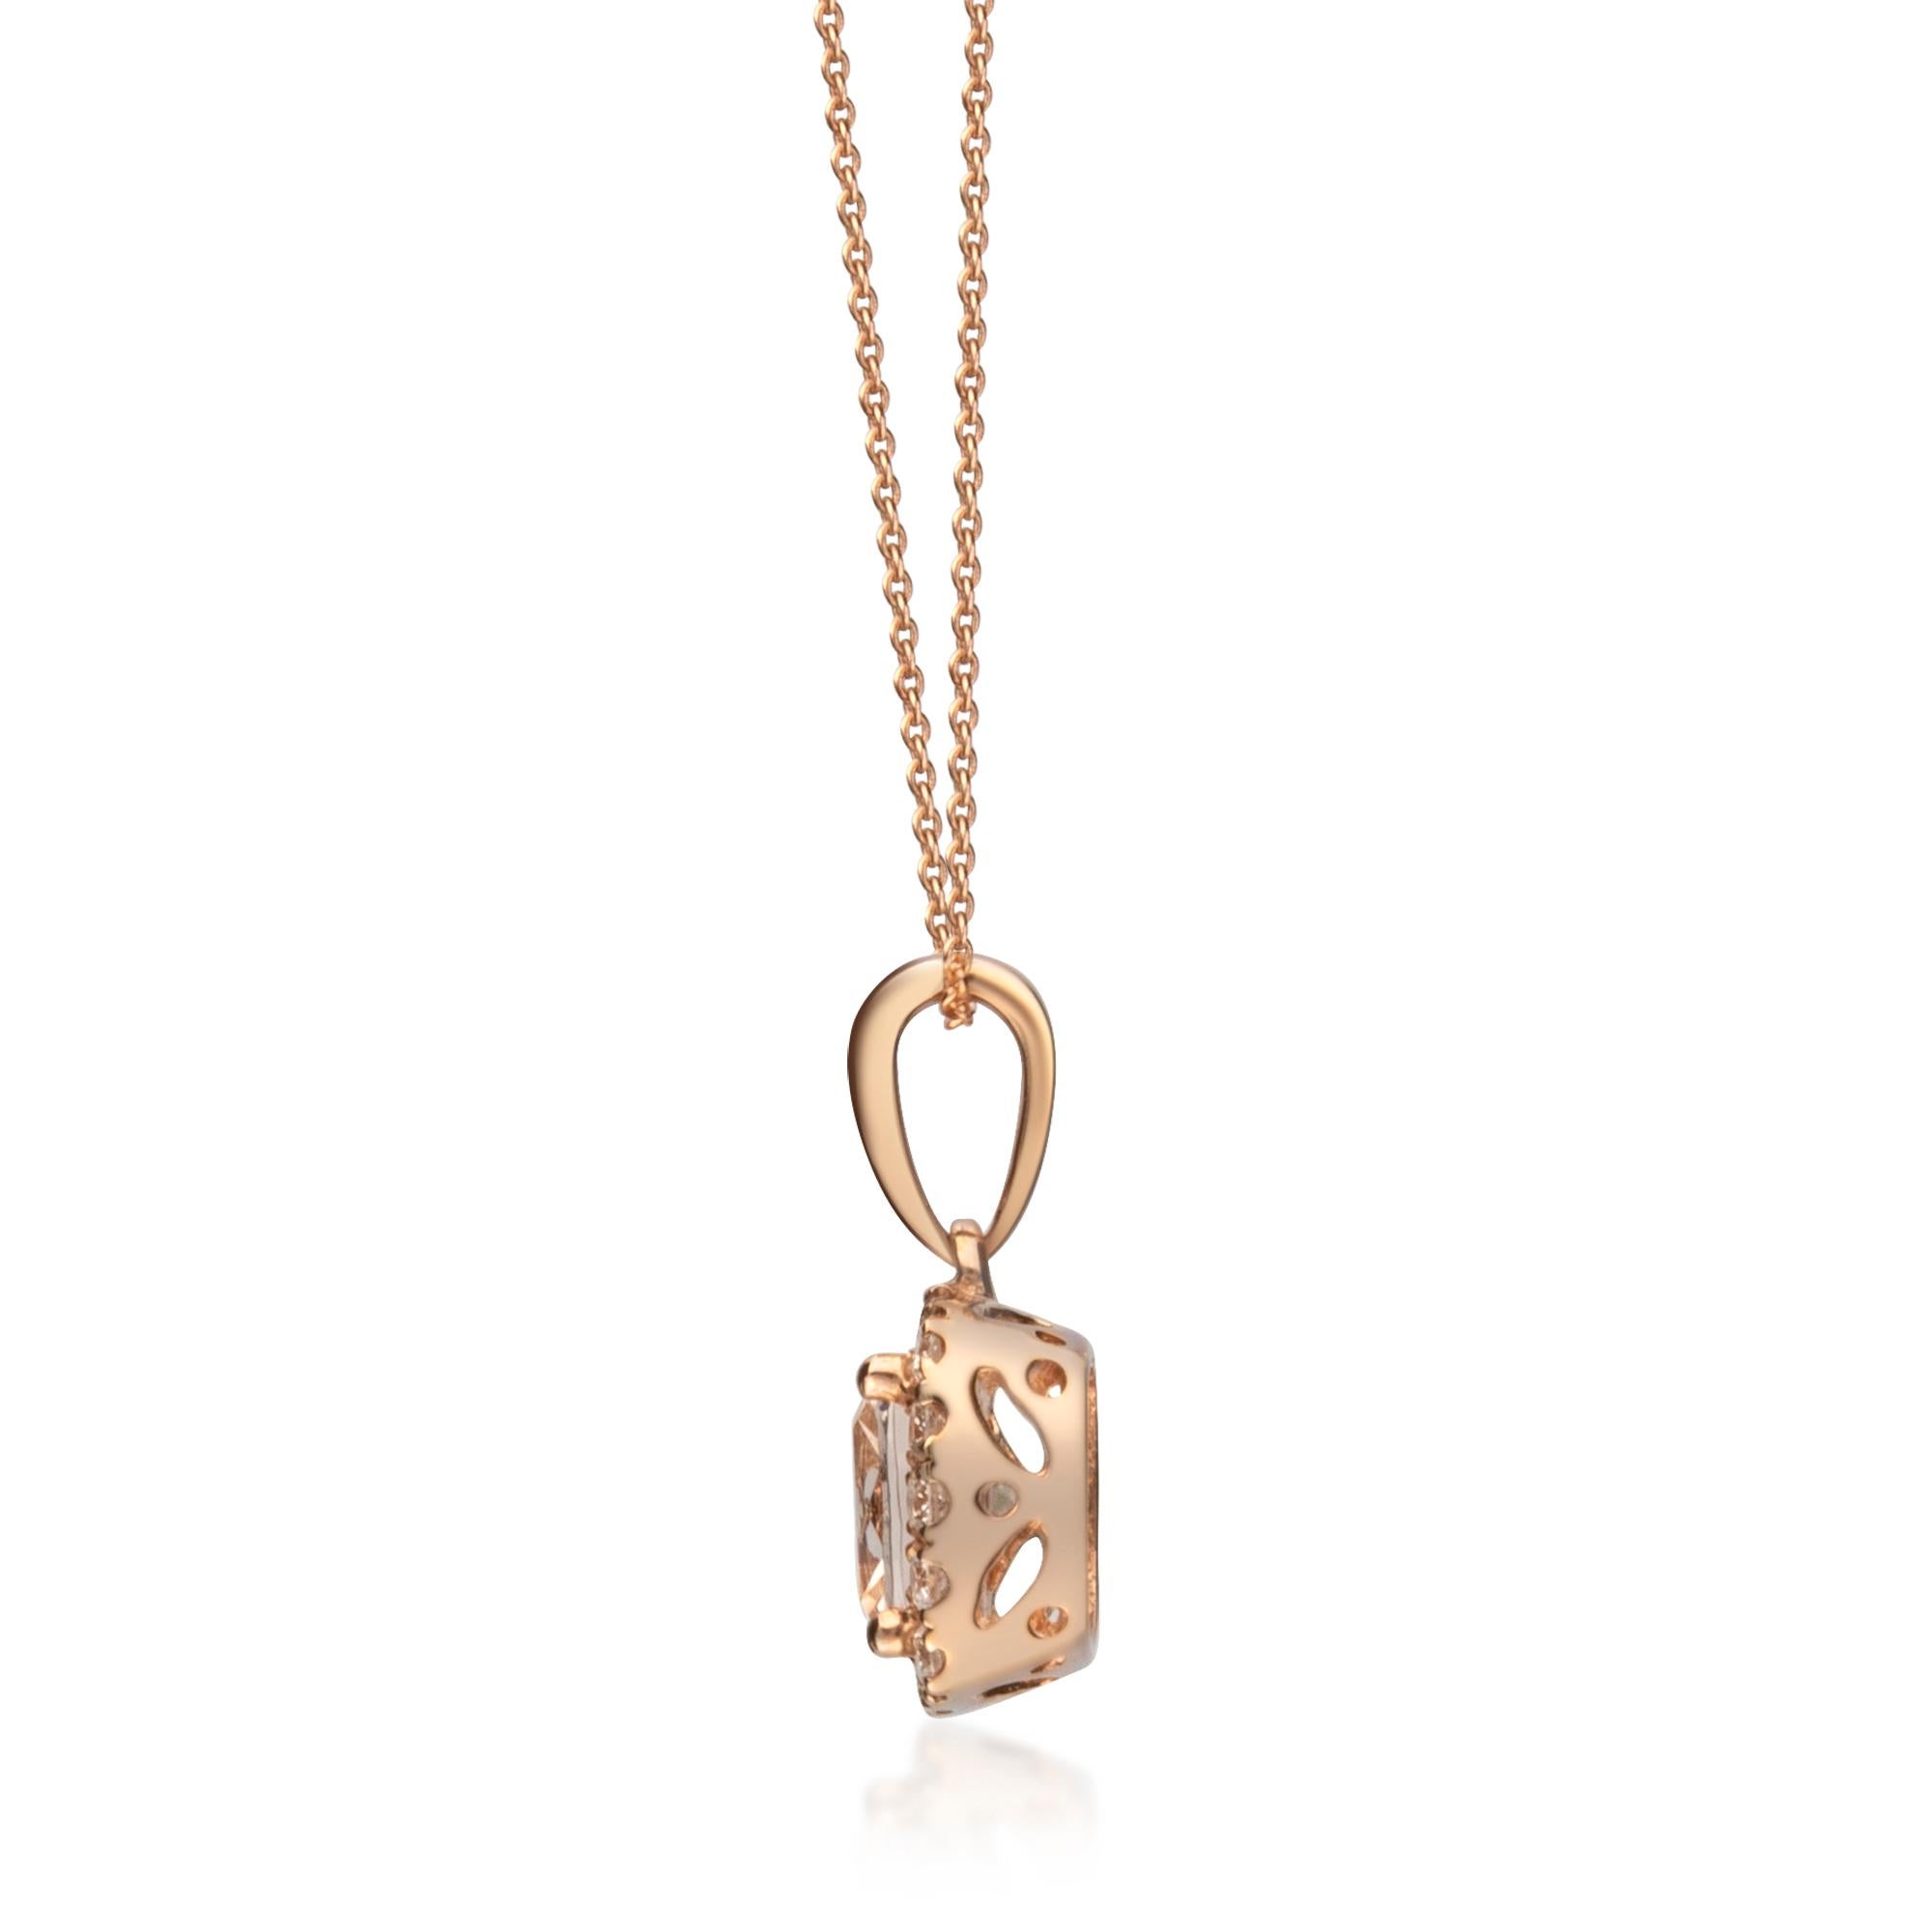 Decorate yourself in elegance with this Pendant is crafted from 10-karat Rose Gold by Gin & Grace Pendant. This Pendant is made up of 6MM Cushion-Cut Prong setting Genuine Morganite (1 Pcs) 0.85 Carat and Round-Cut Prong setting White Diamond (16